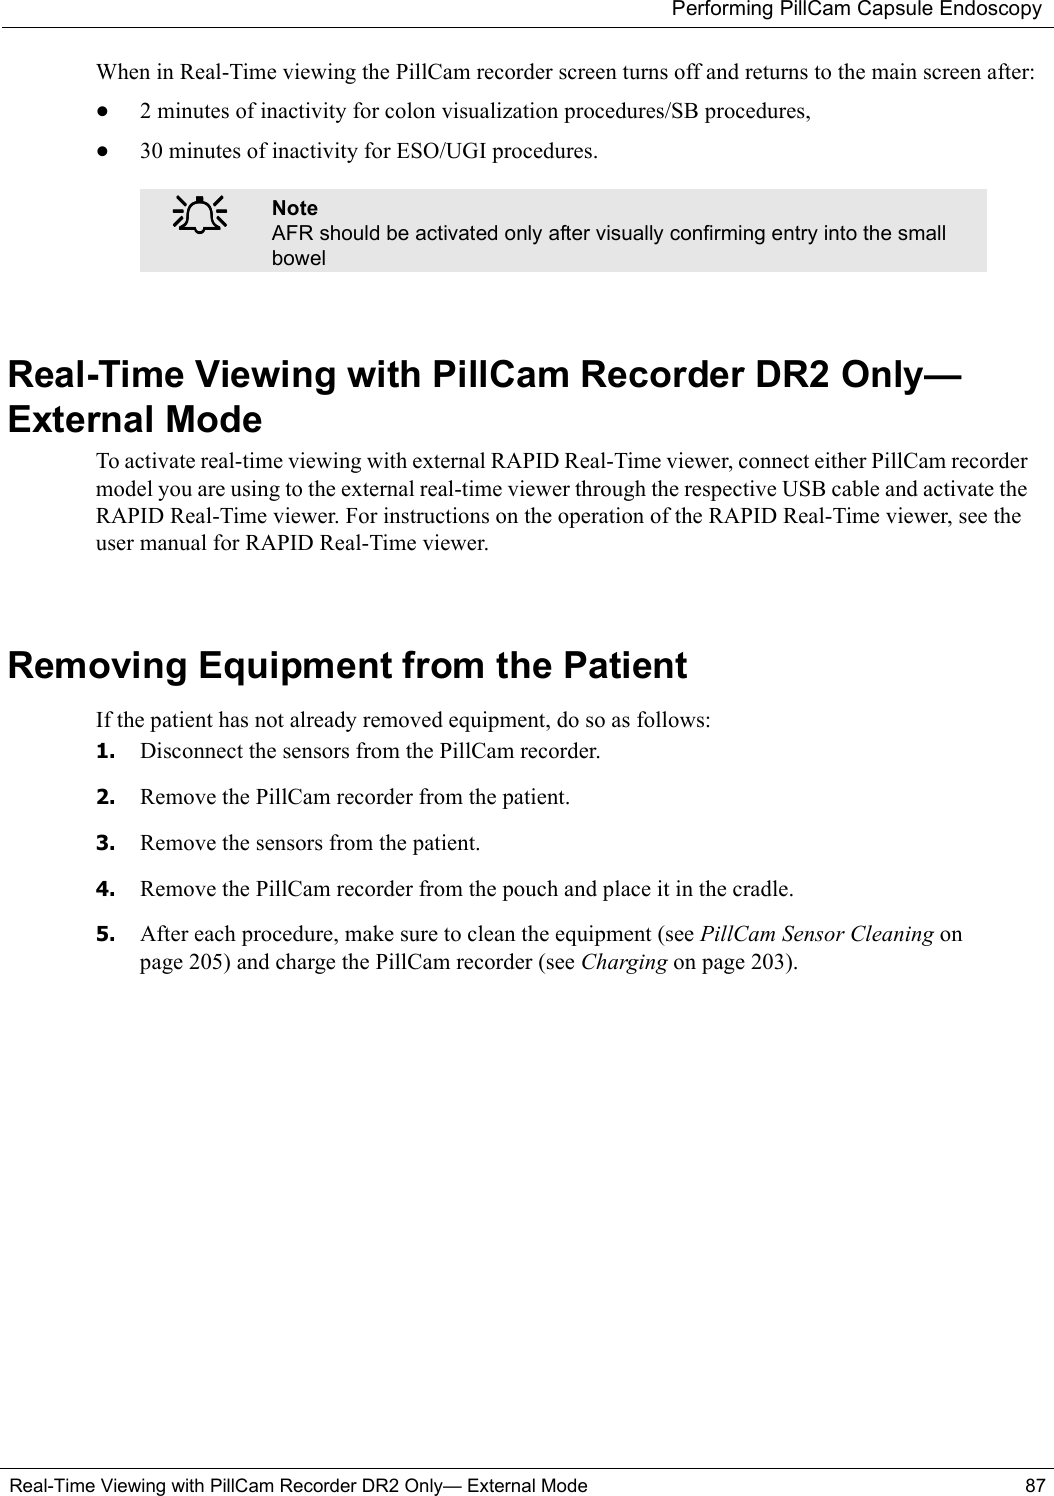 Performing PillCam Capsule EndoscopyReal-Time Viewing with PillCam Recorder DR2 Only— External Mode 87When in Real-Time viewing the PillCam recorder screen turns off and returns to the main screen after:•2 minutes of inactivity for colon visualization procedures/SB procedures,•30 minutes of inactivity for ESO/UGI procedures.Real-Time Viewing with PillCam Recorder DR2 Only—External ModeTo activate real-time viewing with external RAPID Real-Time viewer, connect either PillCam recorder model you are using to the external real-time viewer through the respective USB cable and activate the RAPID Real-Time viewer. For instructions on the operation of the RAPID Real-Time viewer, see the user manual for RAPID Real-Time viewer.Removing Equipment from the PatientIf the patient has not already removed equipment, do so as follows:1. Disconnect the sensors from the PillCam recorder.2. Remove the PillCam recorder from the patient.3. Remove the sensors from the patient.4. Remove the PillCam recorder from the pouch and place it in the cradle.5. After each procedure, make sure to clean the equipment (see PillCam Sensor Cleaning on page 205) and charge the PillCam recorder (see Charging on page 203).֠֠֠֠NoteAFR should be activated only after visually confirming entry into the small bowel